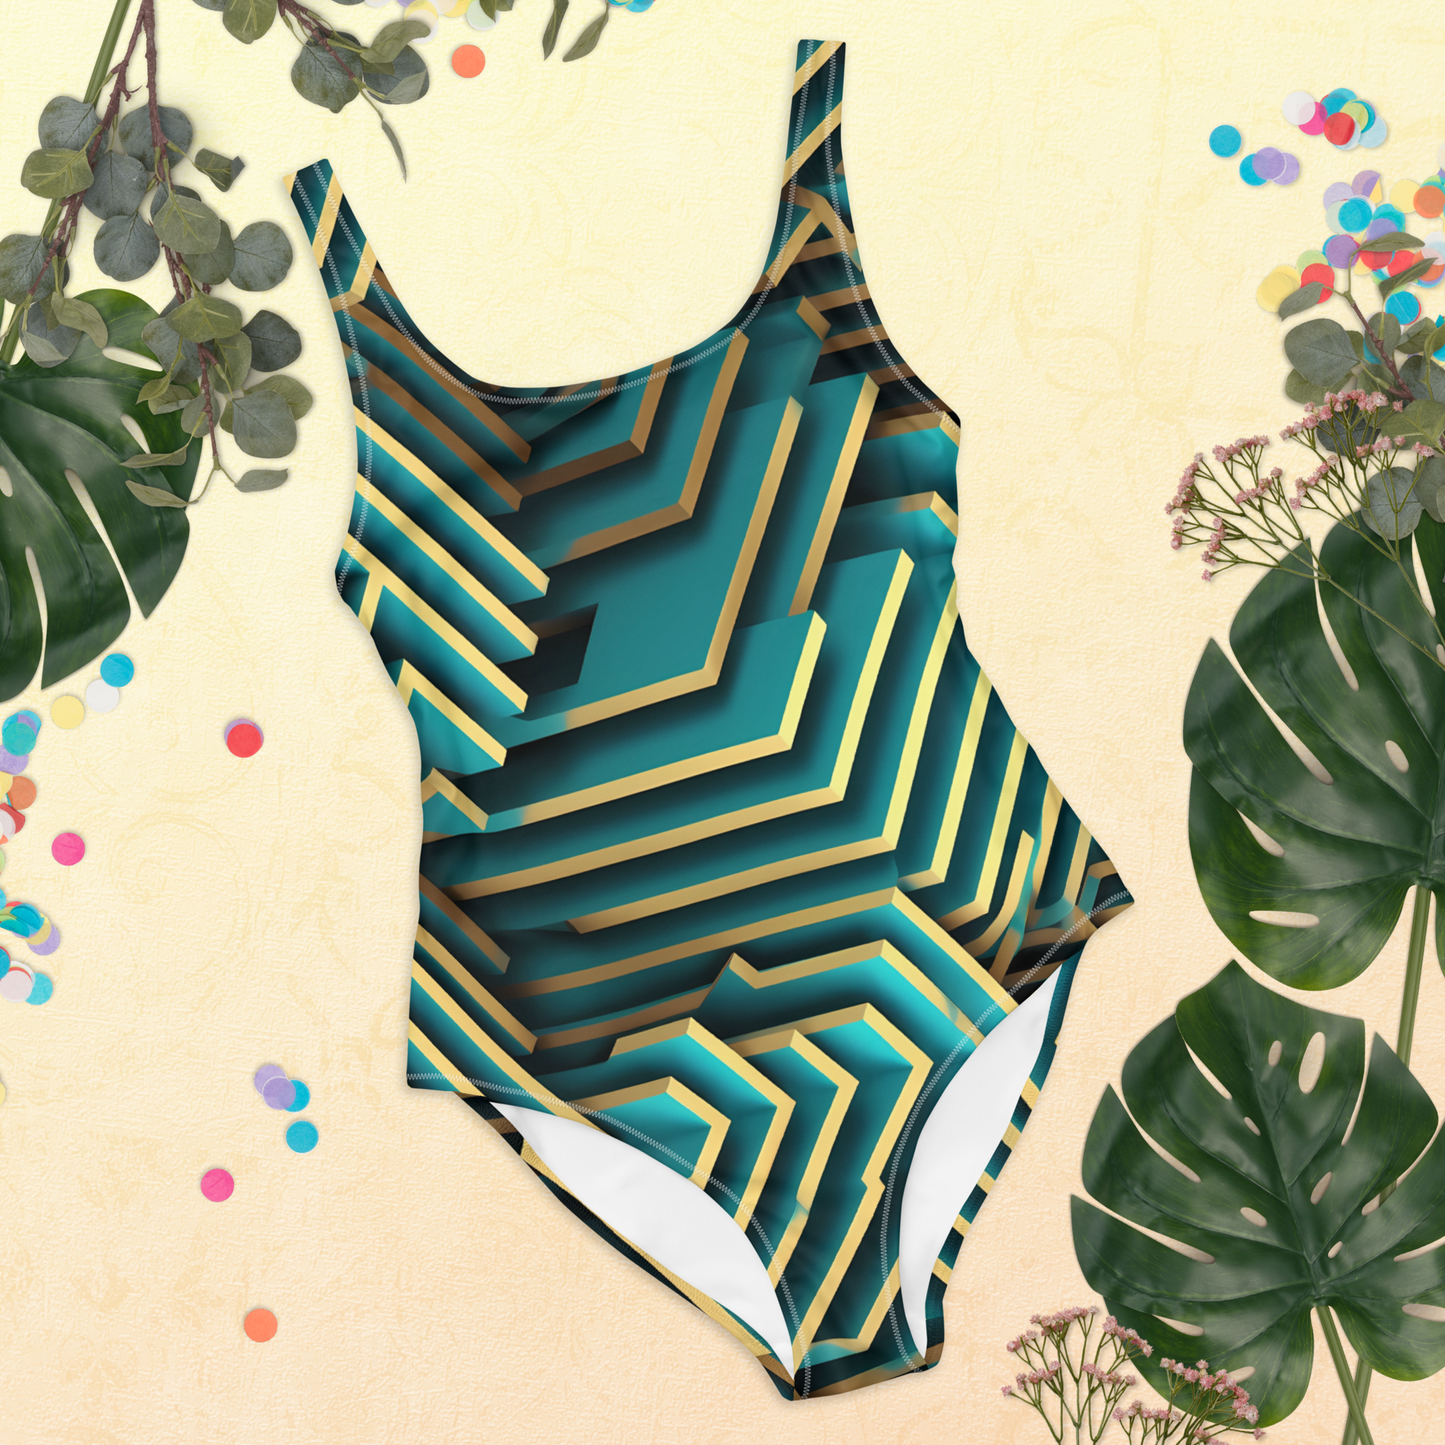 3D Maze Illusion | 3D Patterns | All-Over Print One-Piece Swimsuit - #5